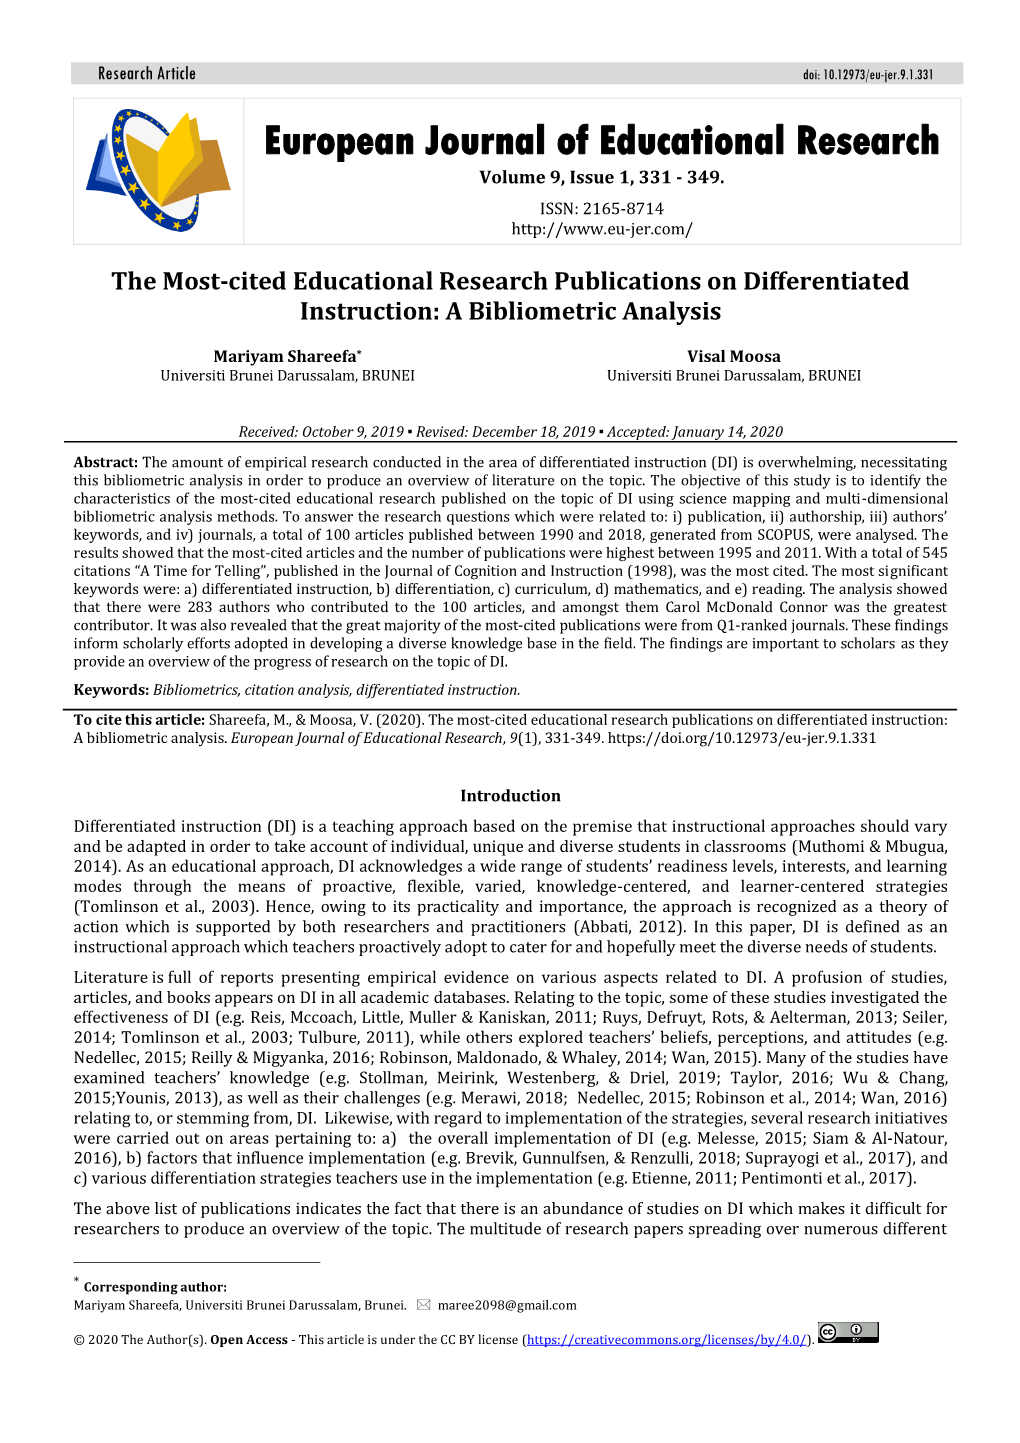 European Journal of Educational Research Volume 9, Issue 1, 331 - 349